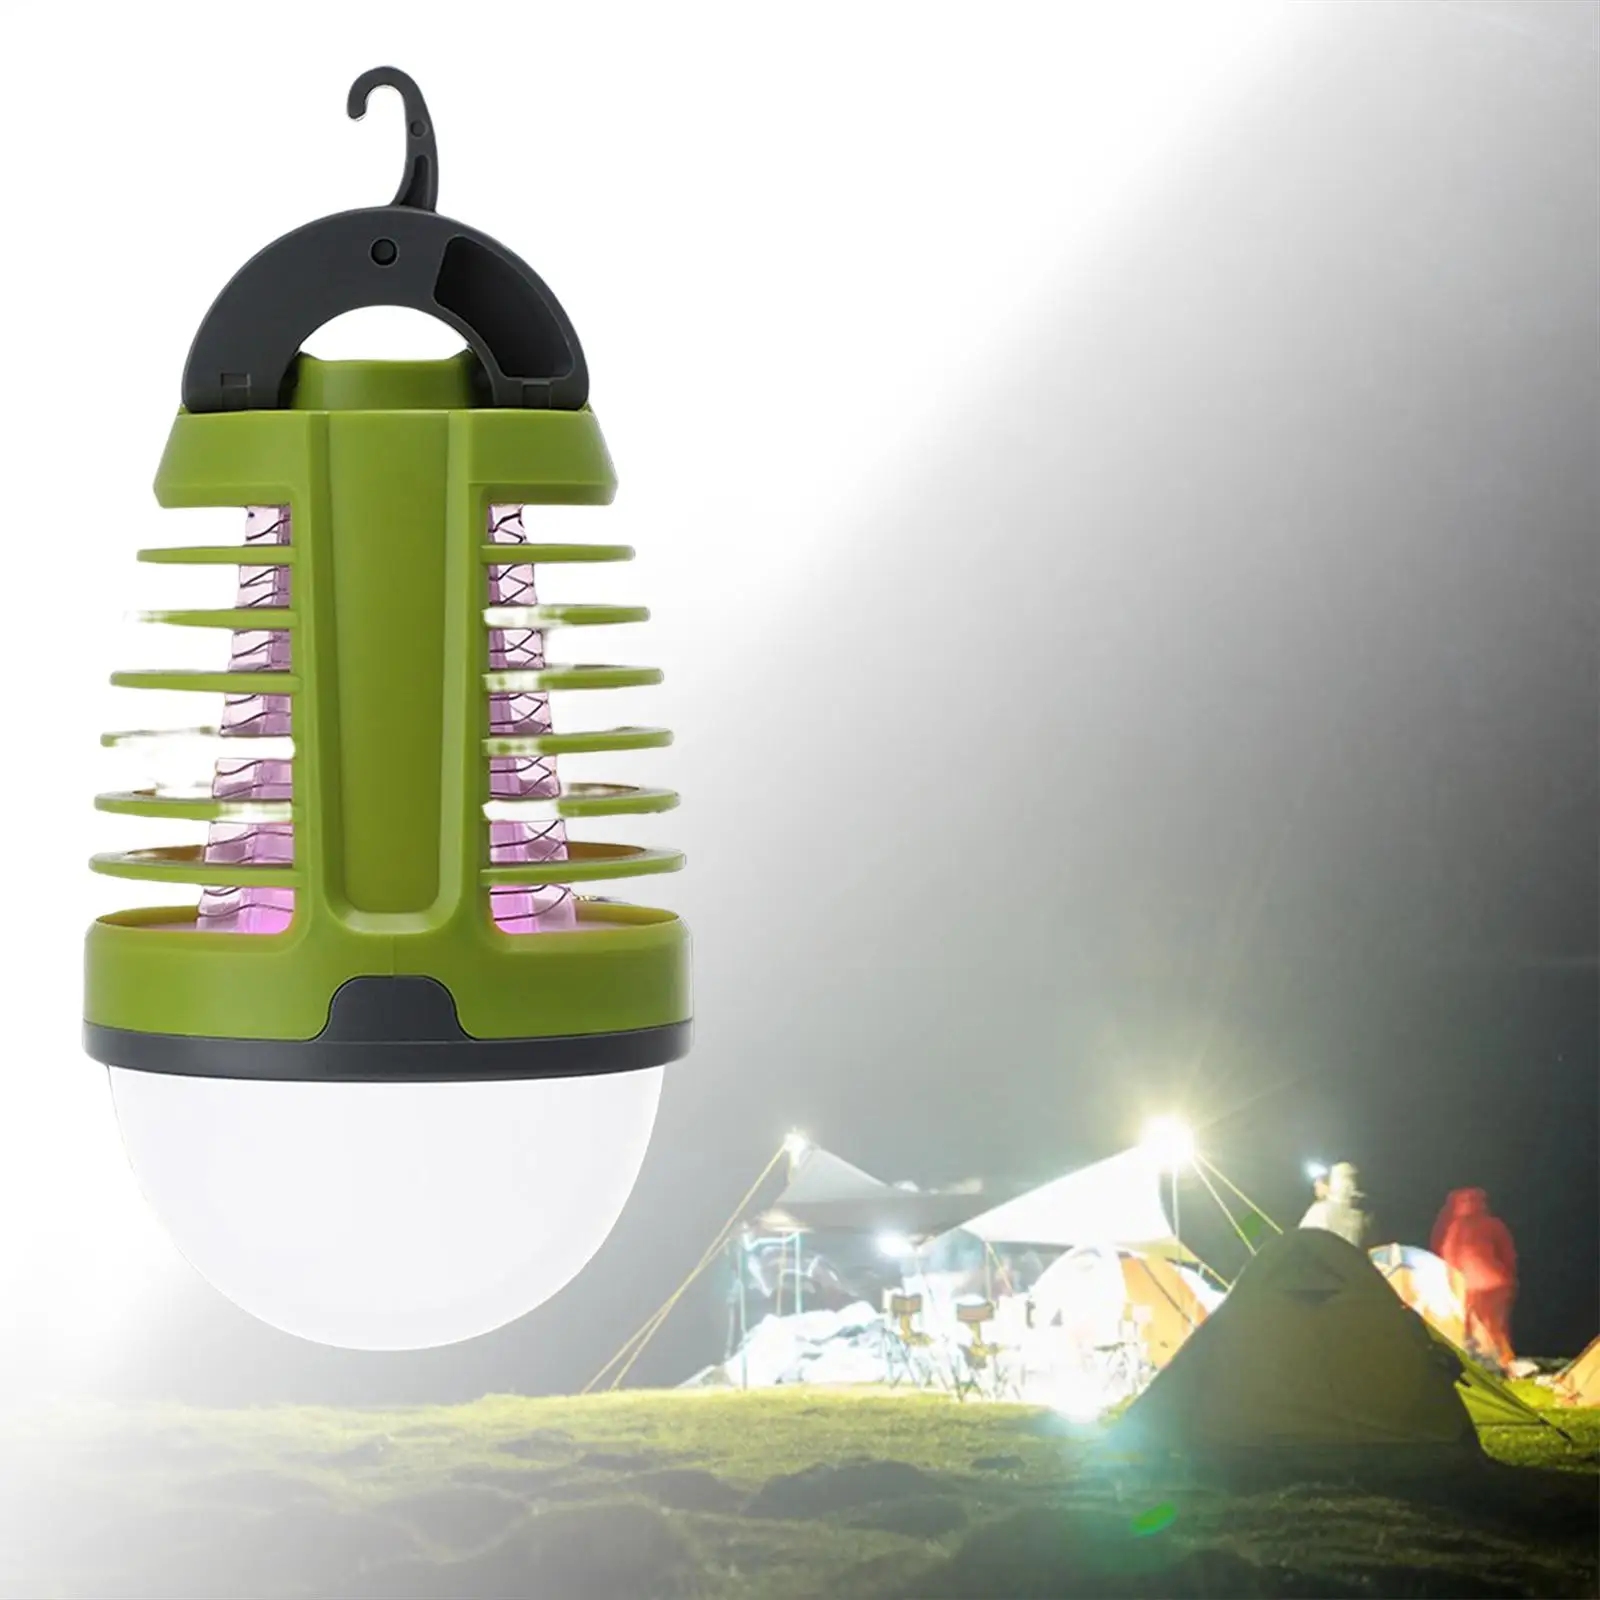 Electric Mosquito Killer Lamp, Killer Trap Insects Trap USB Bug Zapper Hanging Kill Fly Bug Zapper for Bedroom Home Garden